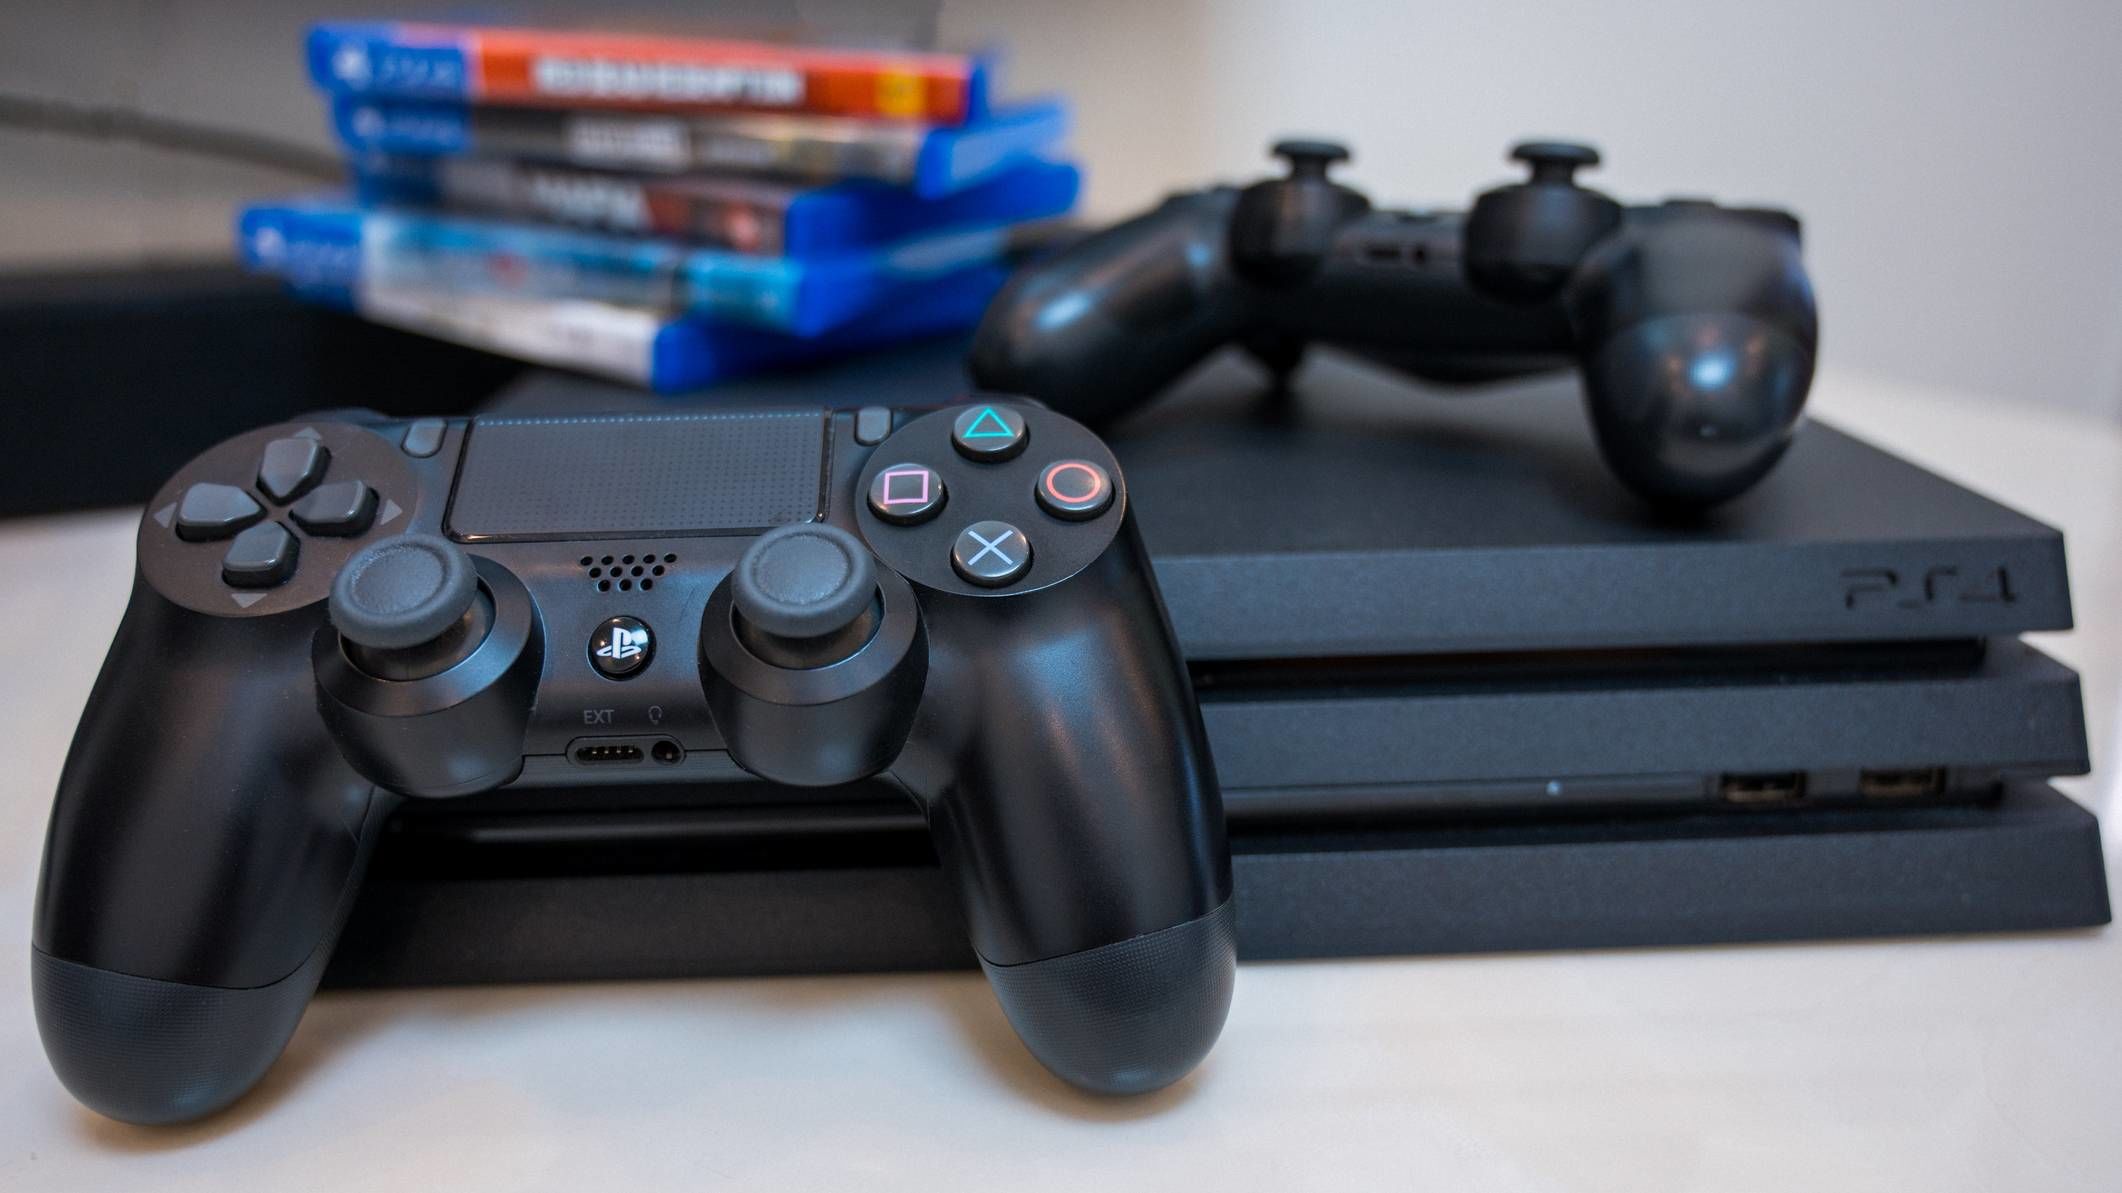 PS4 vs. Xbox One: Which Console Is Better for You?